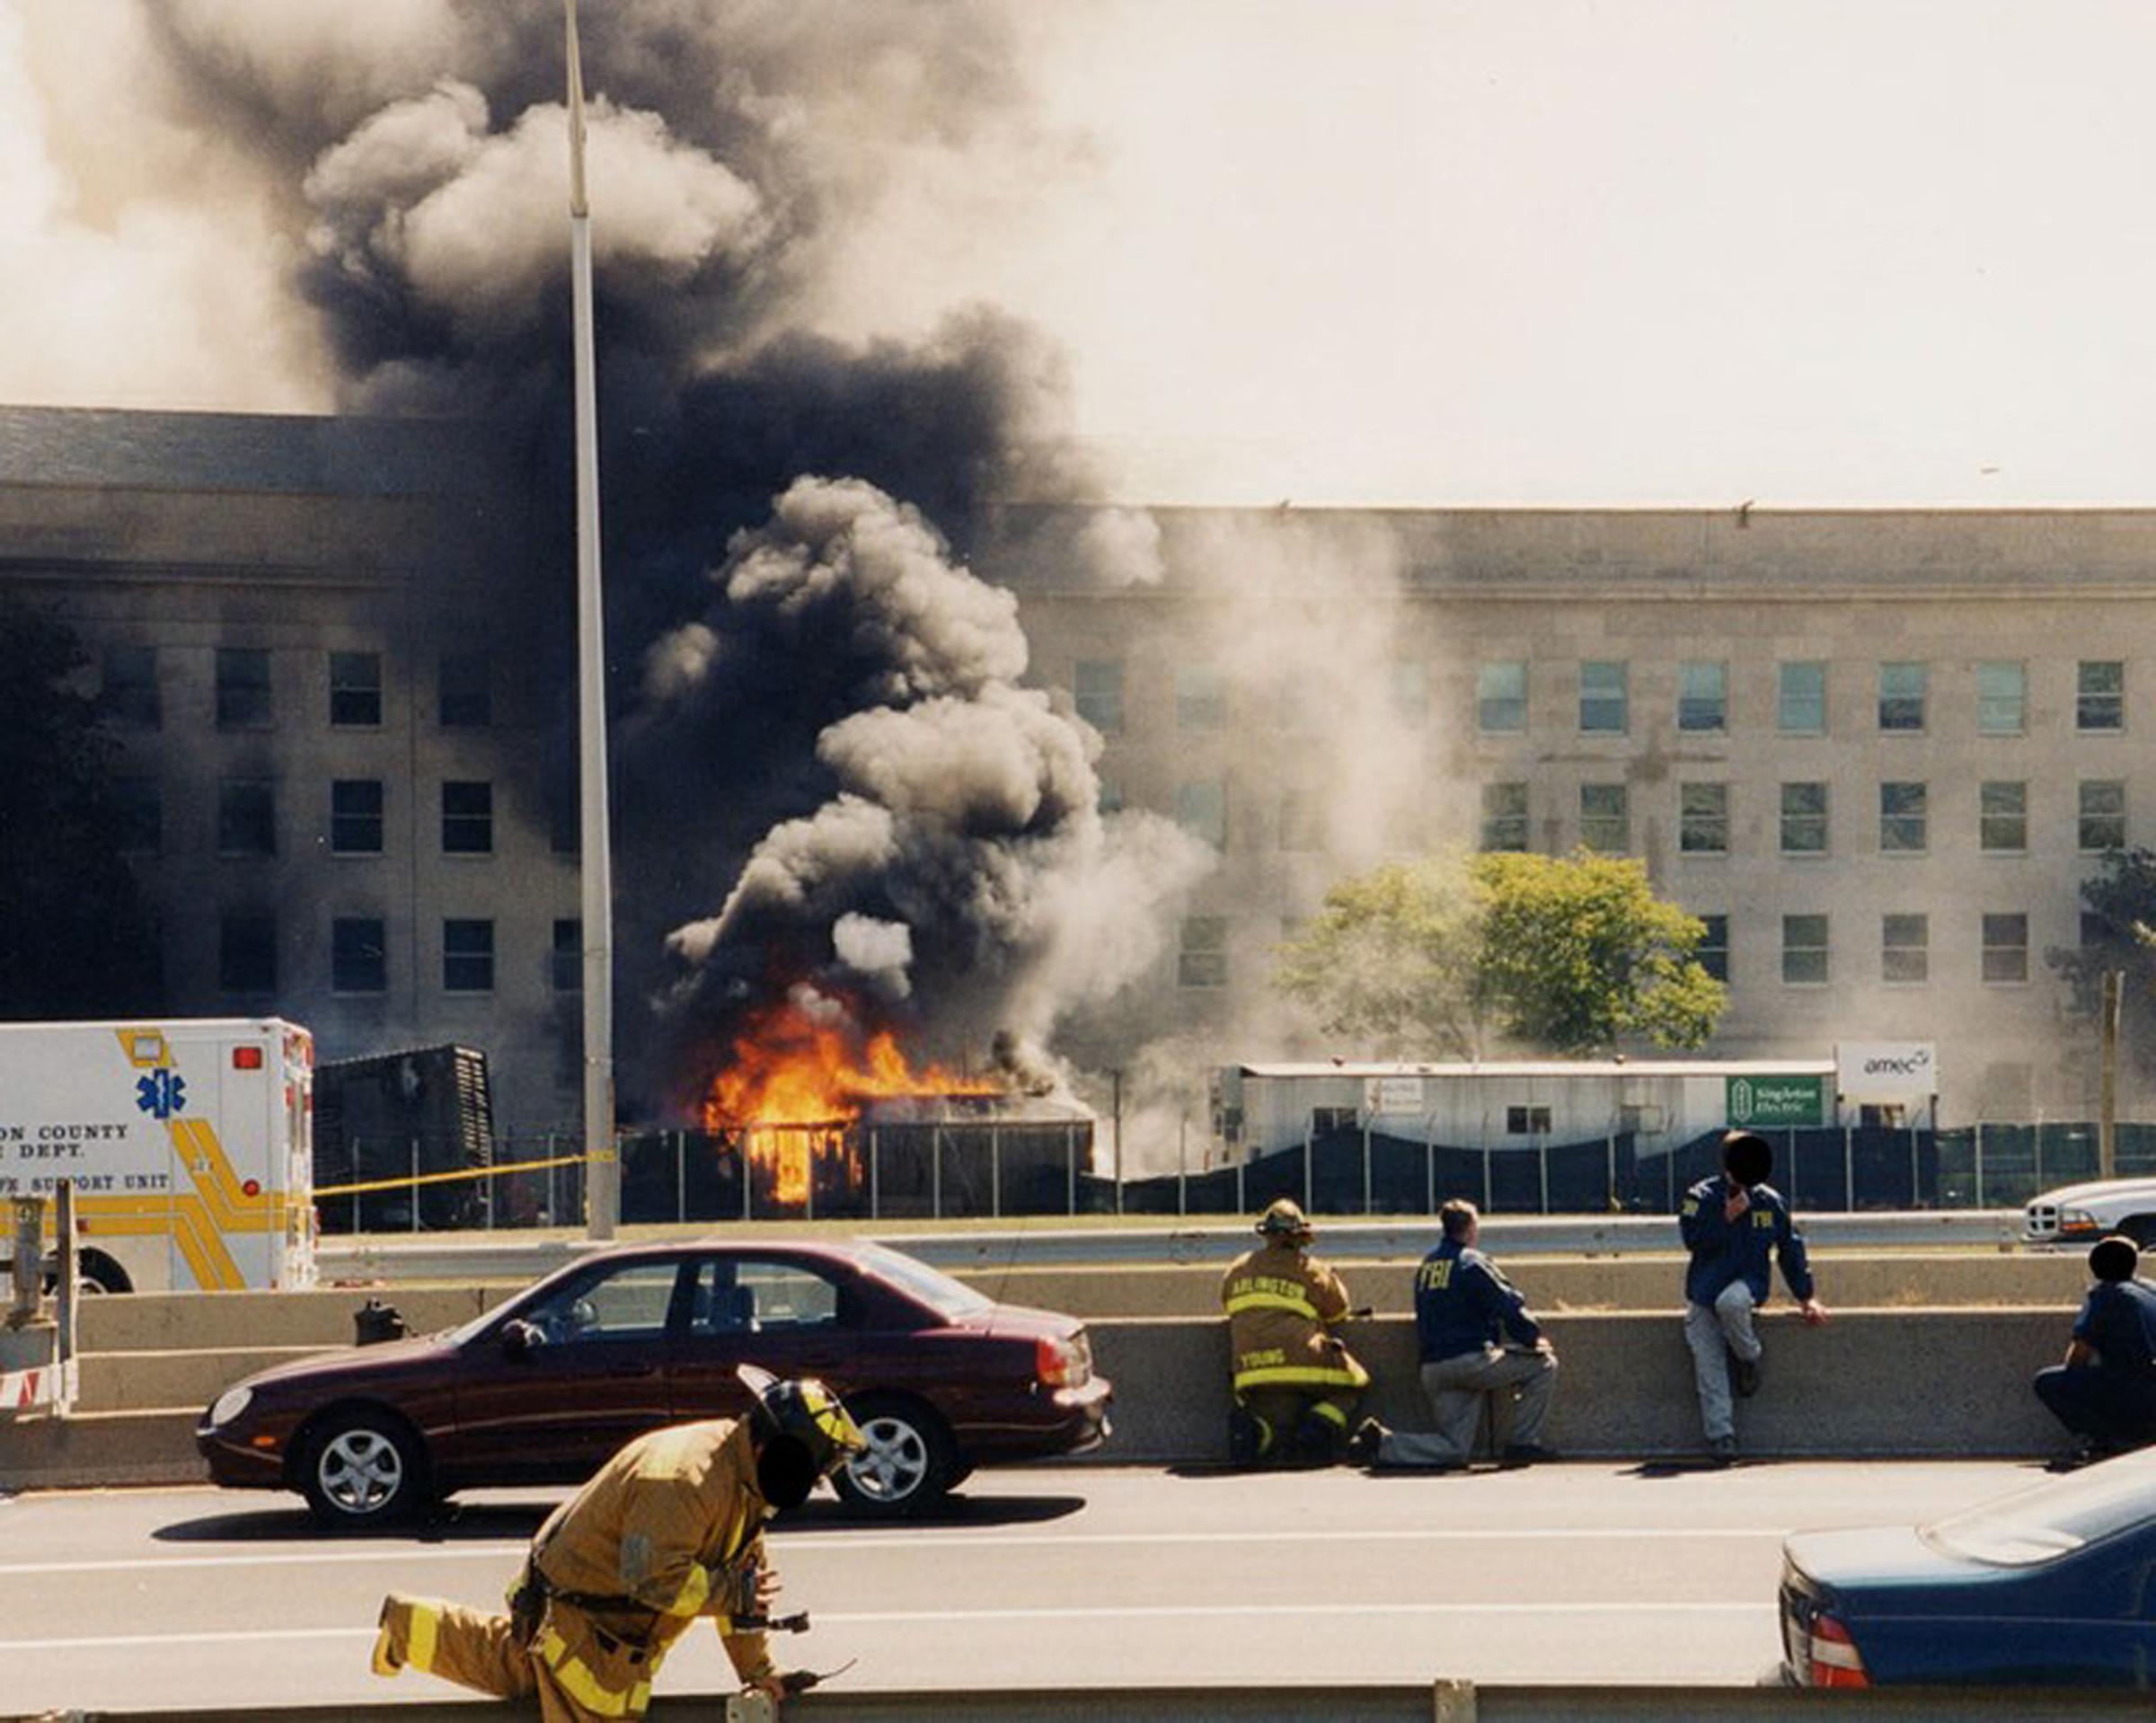 FBI releases images of damage done to Pentagon during September 11th terrorist attacks